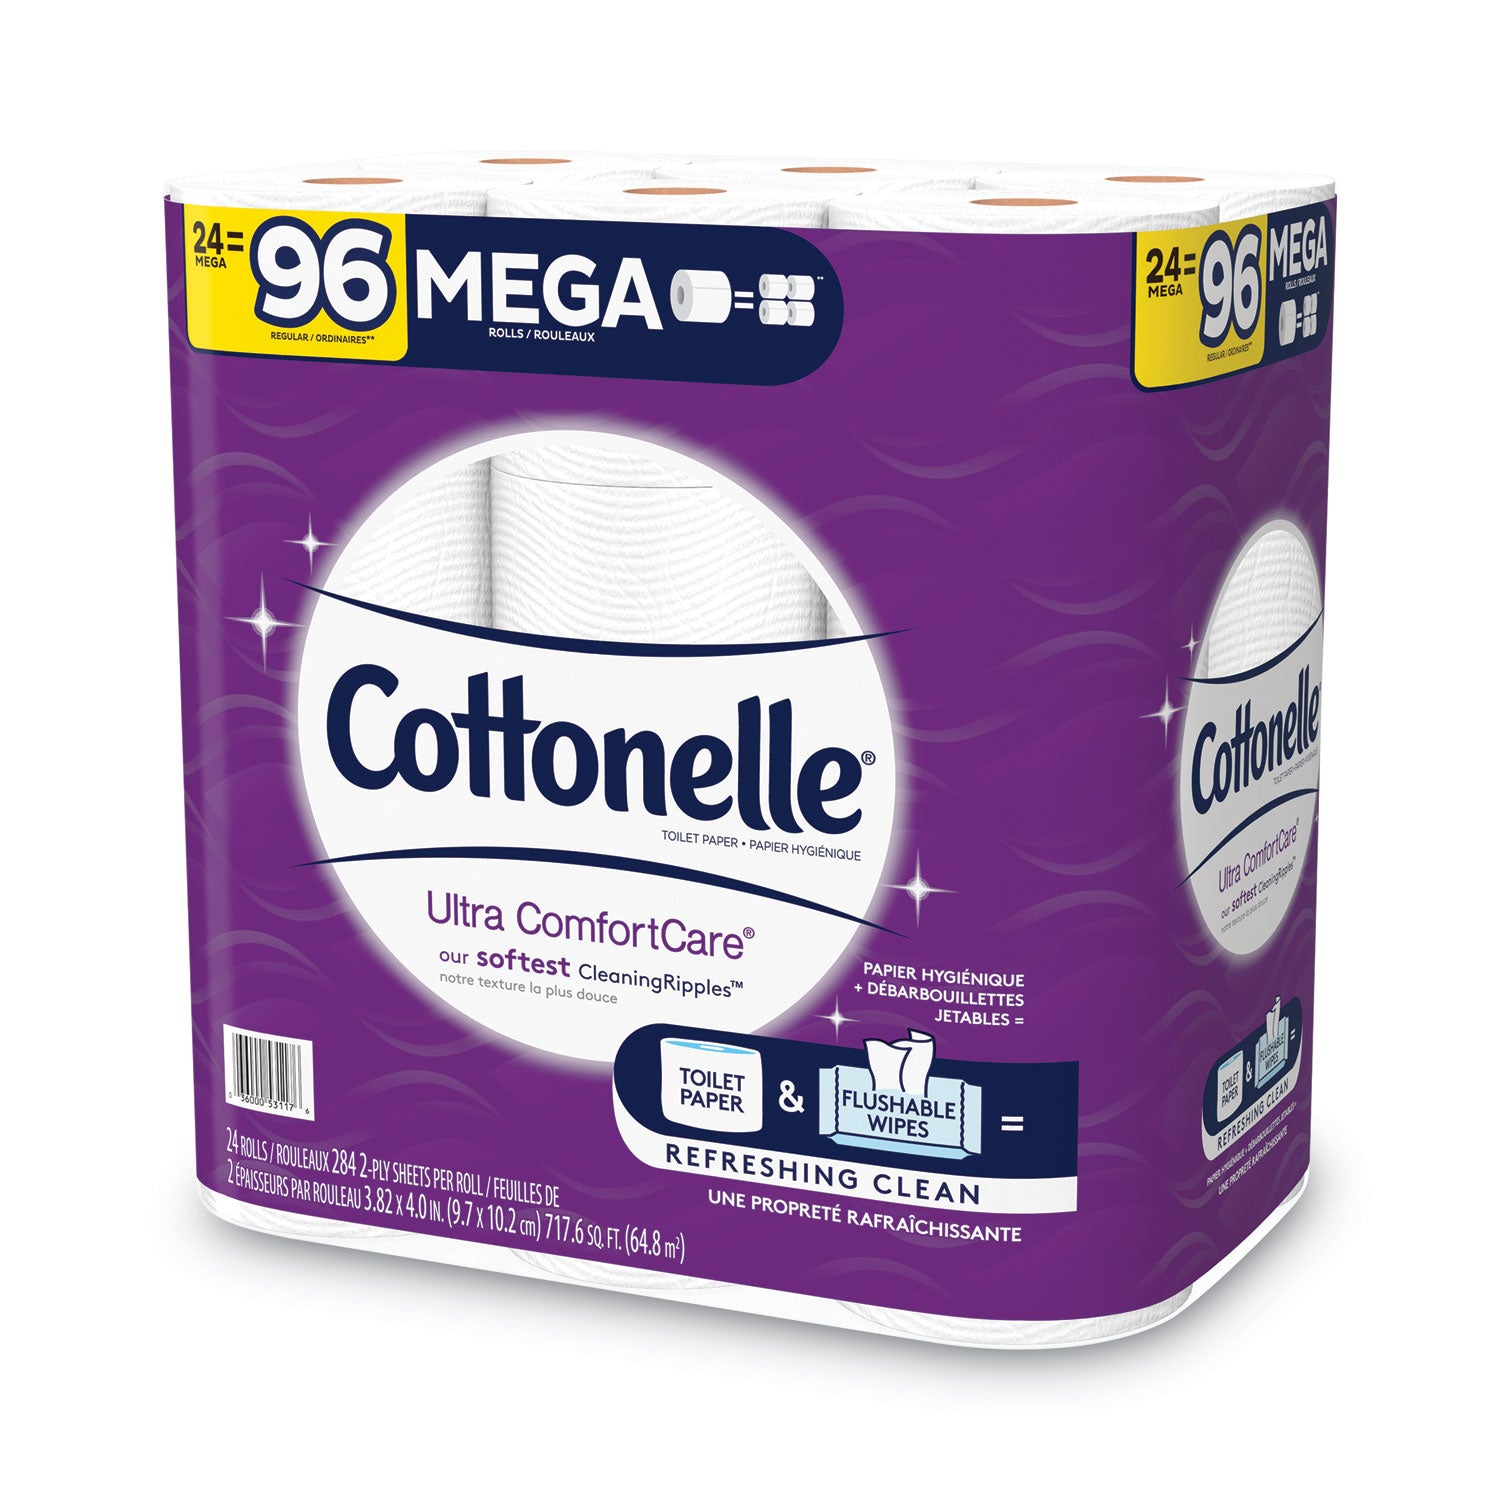 ultra-comfortcare-toilet-paper-soft-tissue-mega-rolls-septic-safe-2-ply-white-284-sheets-roll-24-rolls-pack_kcc53756 - 3